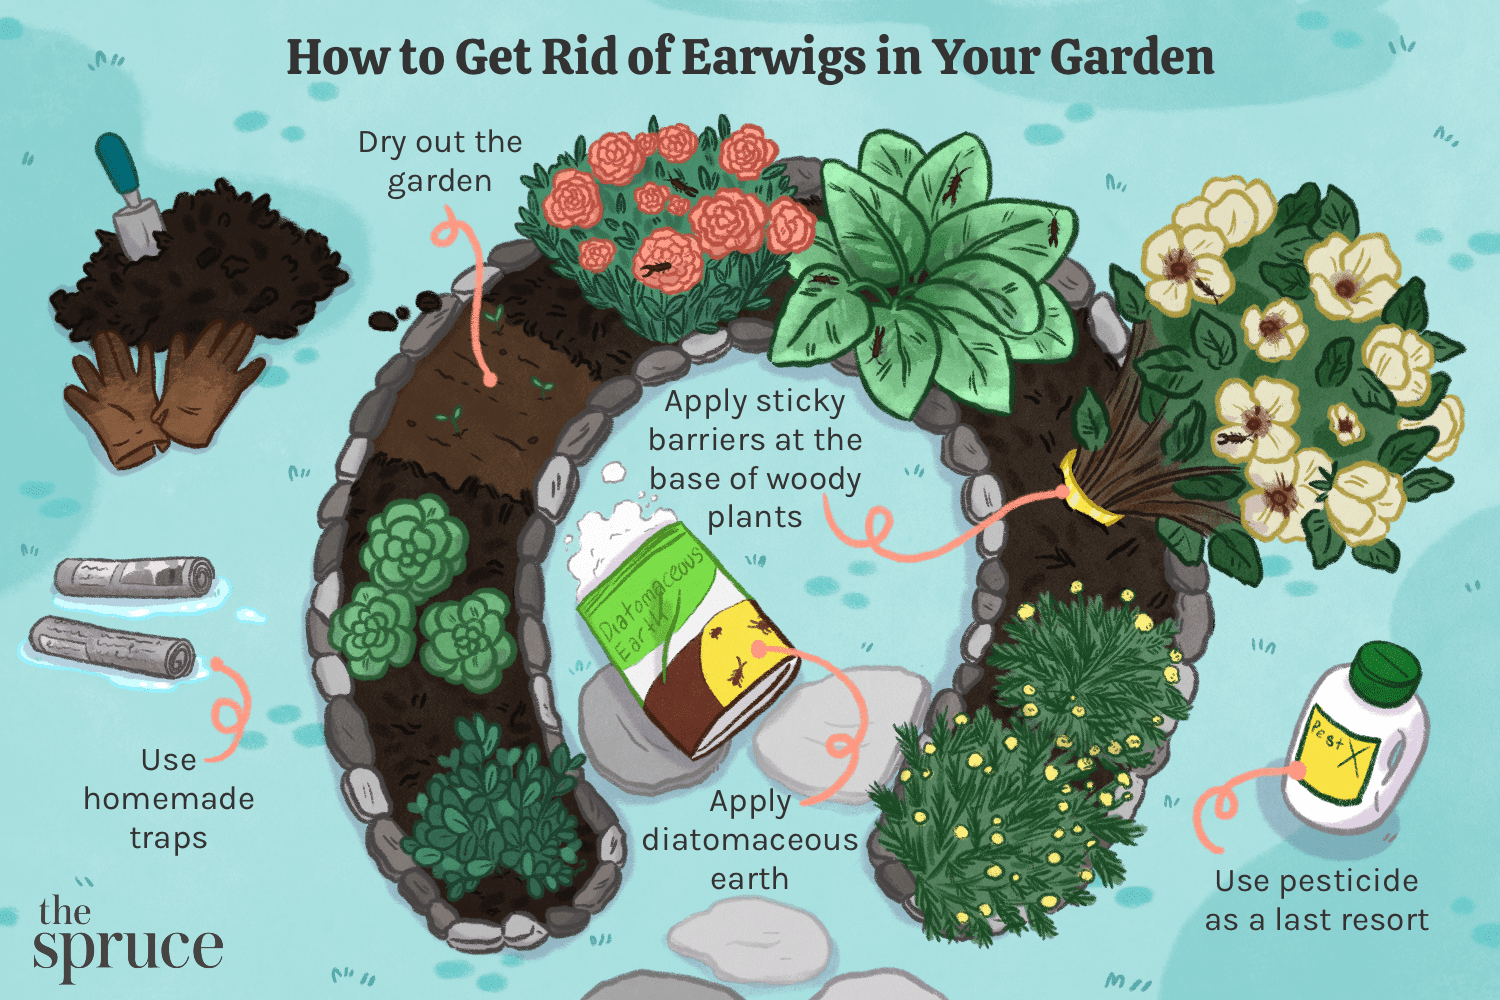 How to Get Rid of Earwigs in Your Garden